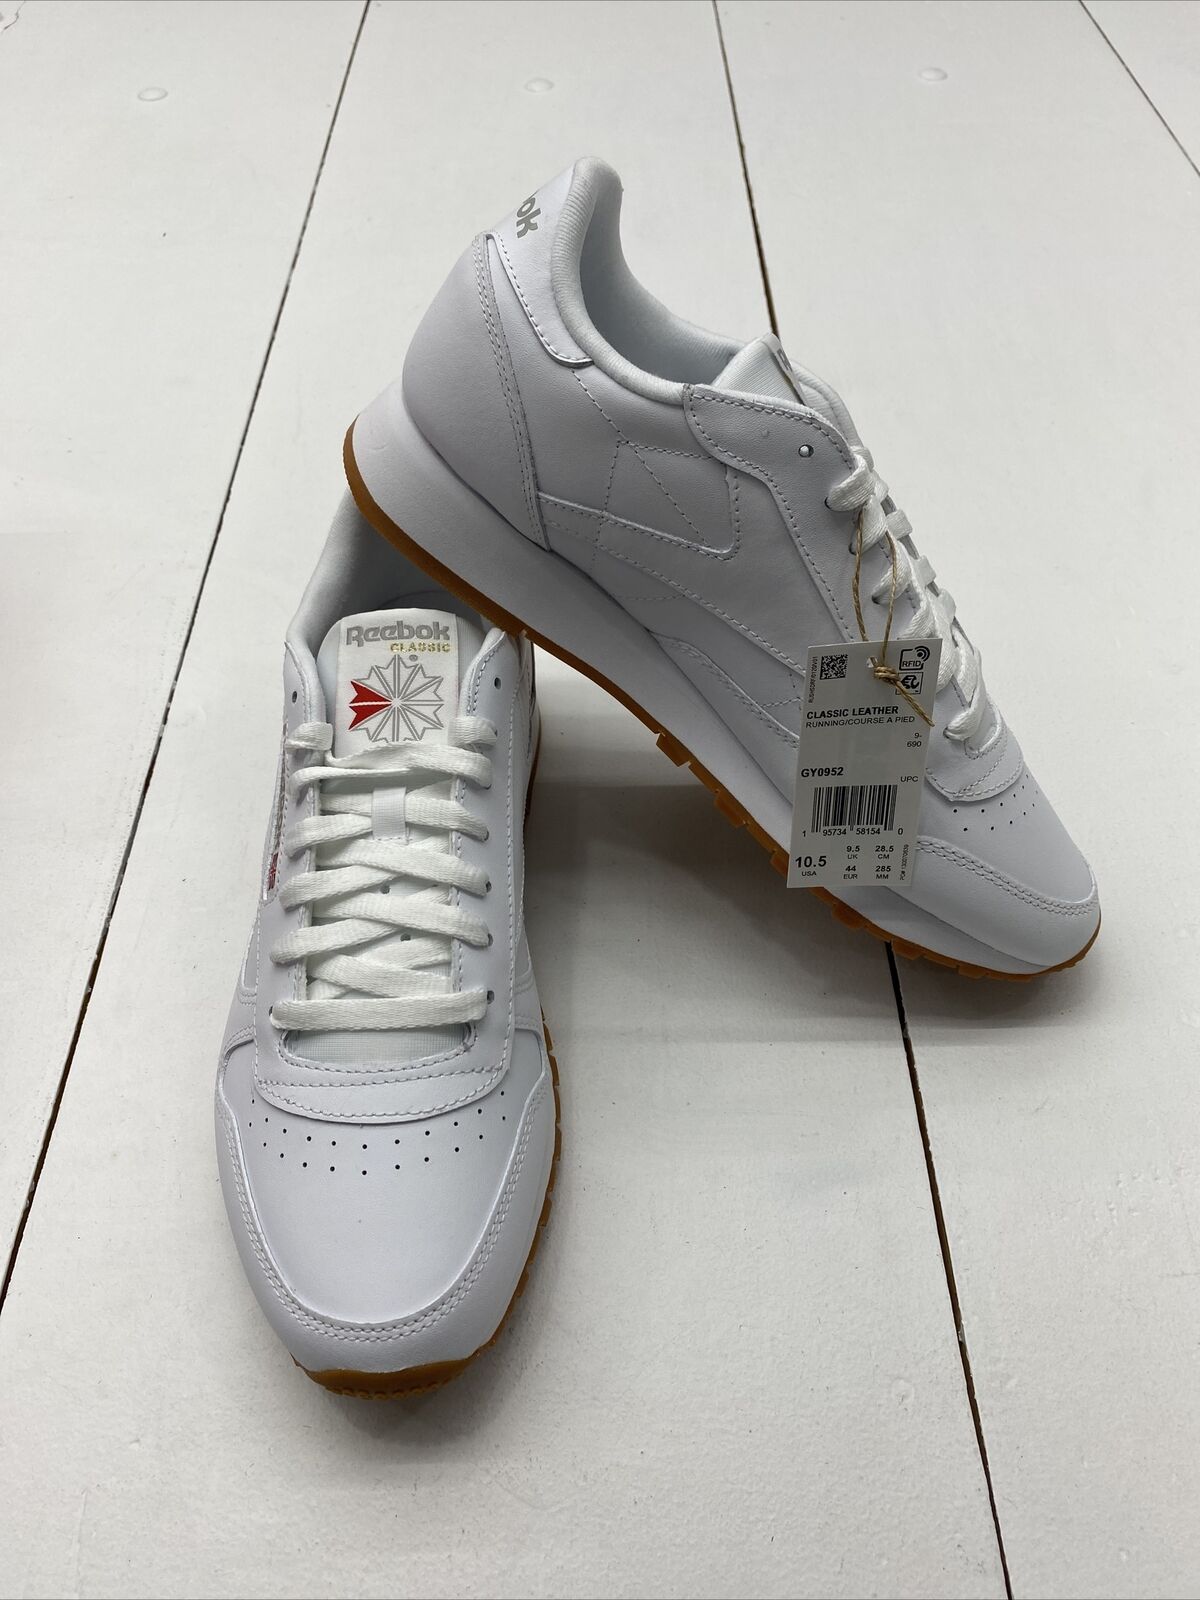 Classic - GY0952 Size Women exchange Leather 10 Sneaker beyond Unisex-Adult White Reebok